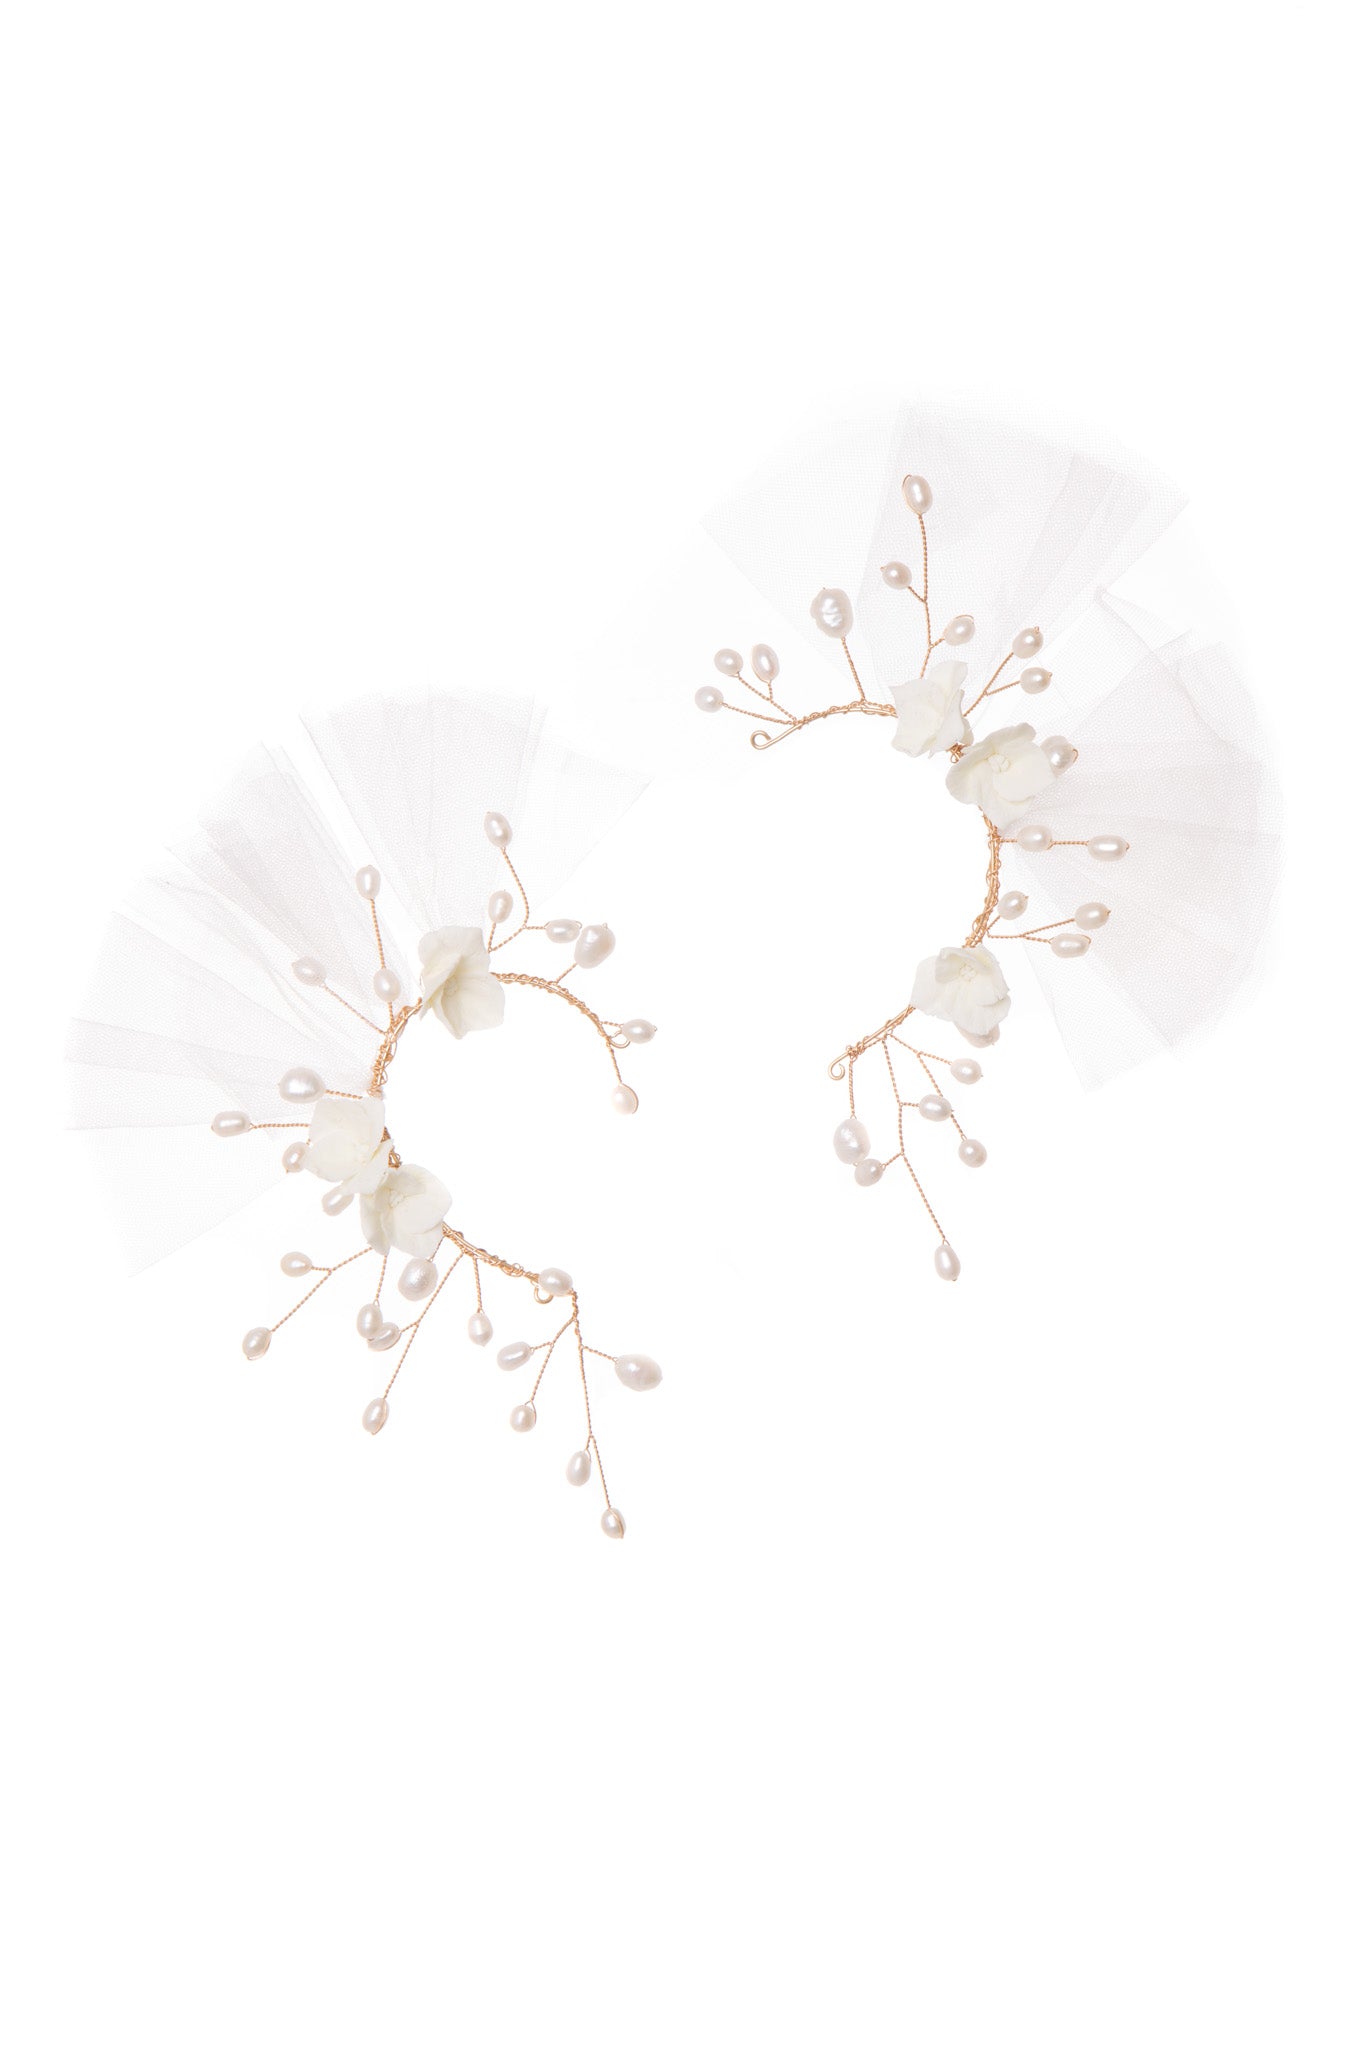 Discover an elegant, fashion-forward look with Cloudburst Cuffs. These delicate ear cuffs feature an intricate floral pattern and pearls, creating a unique yet sophisticated style. 